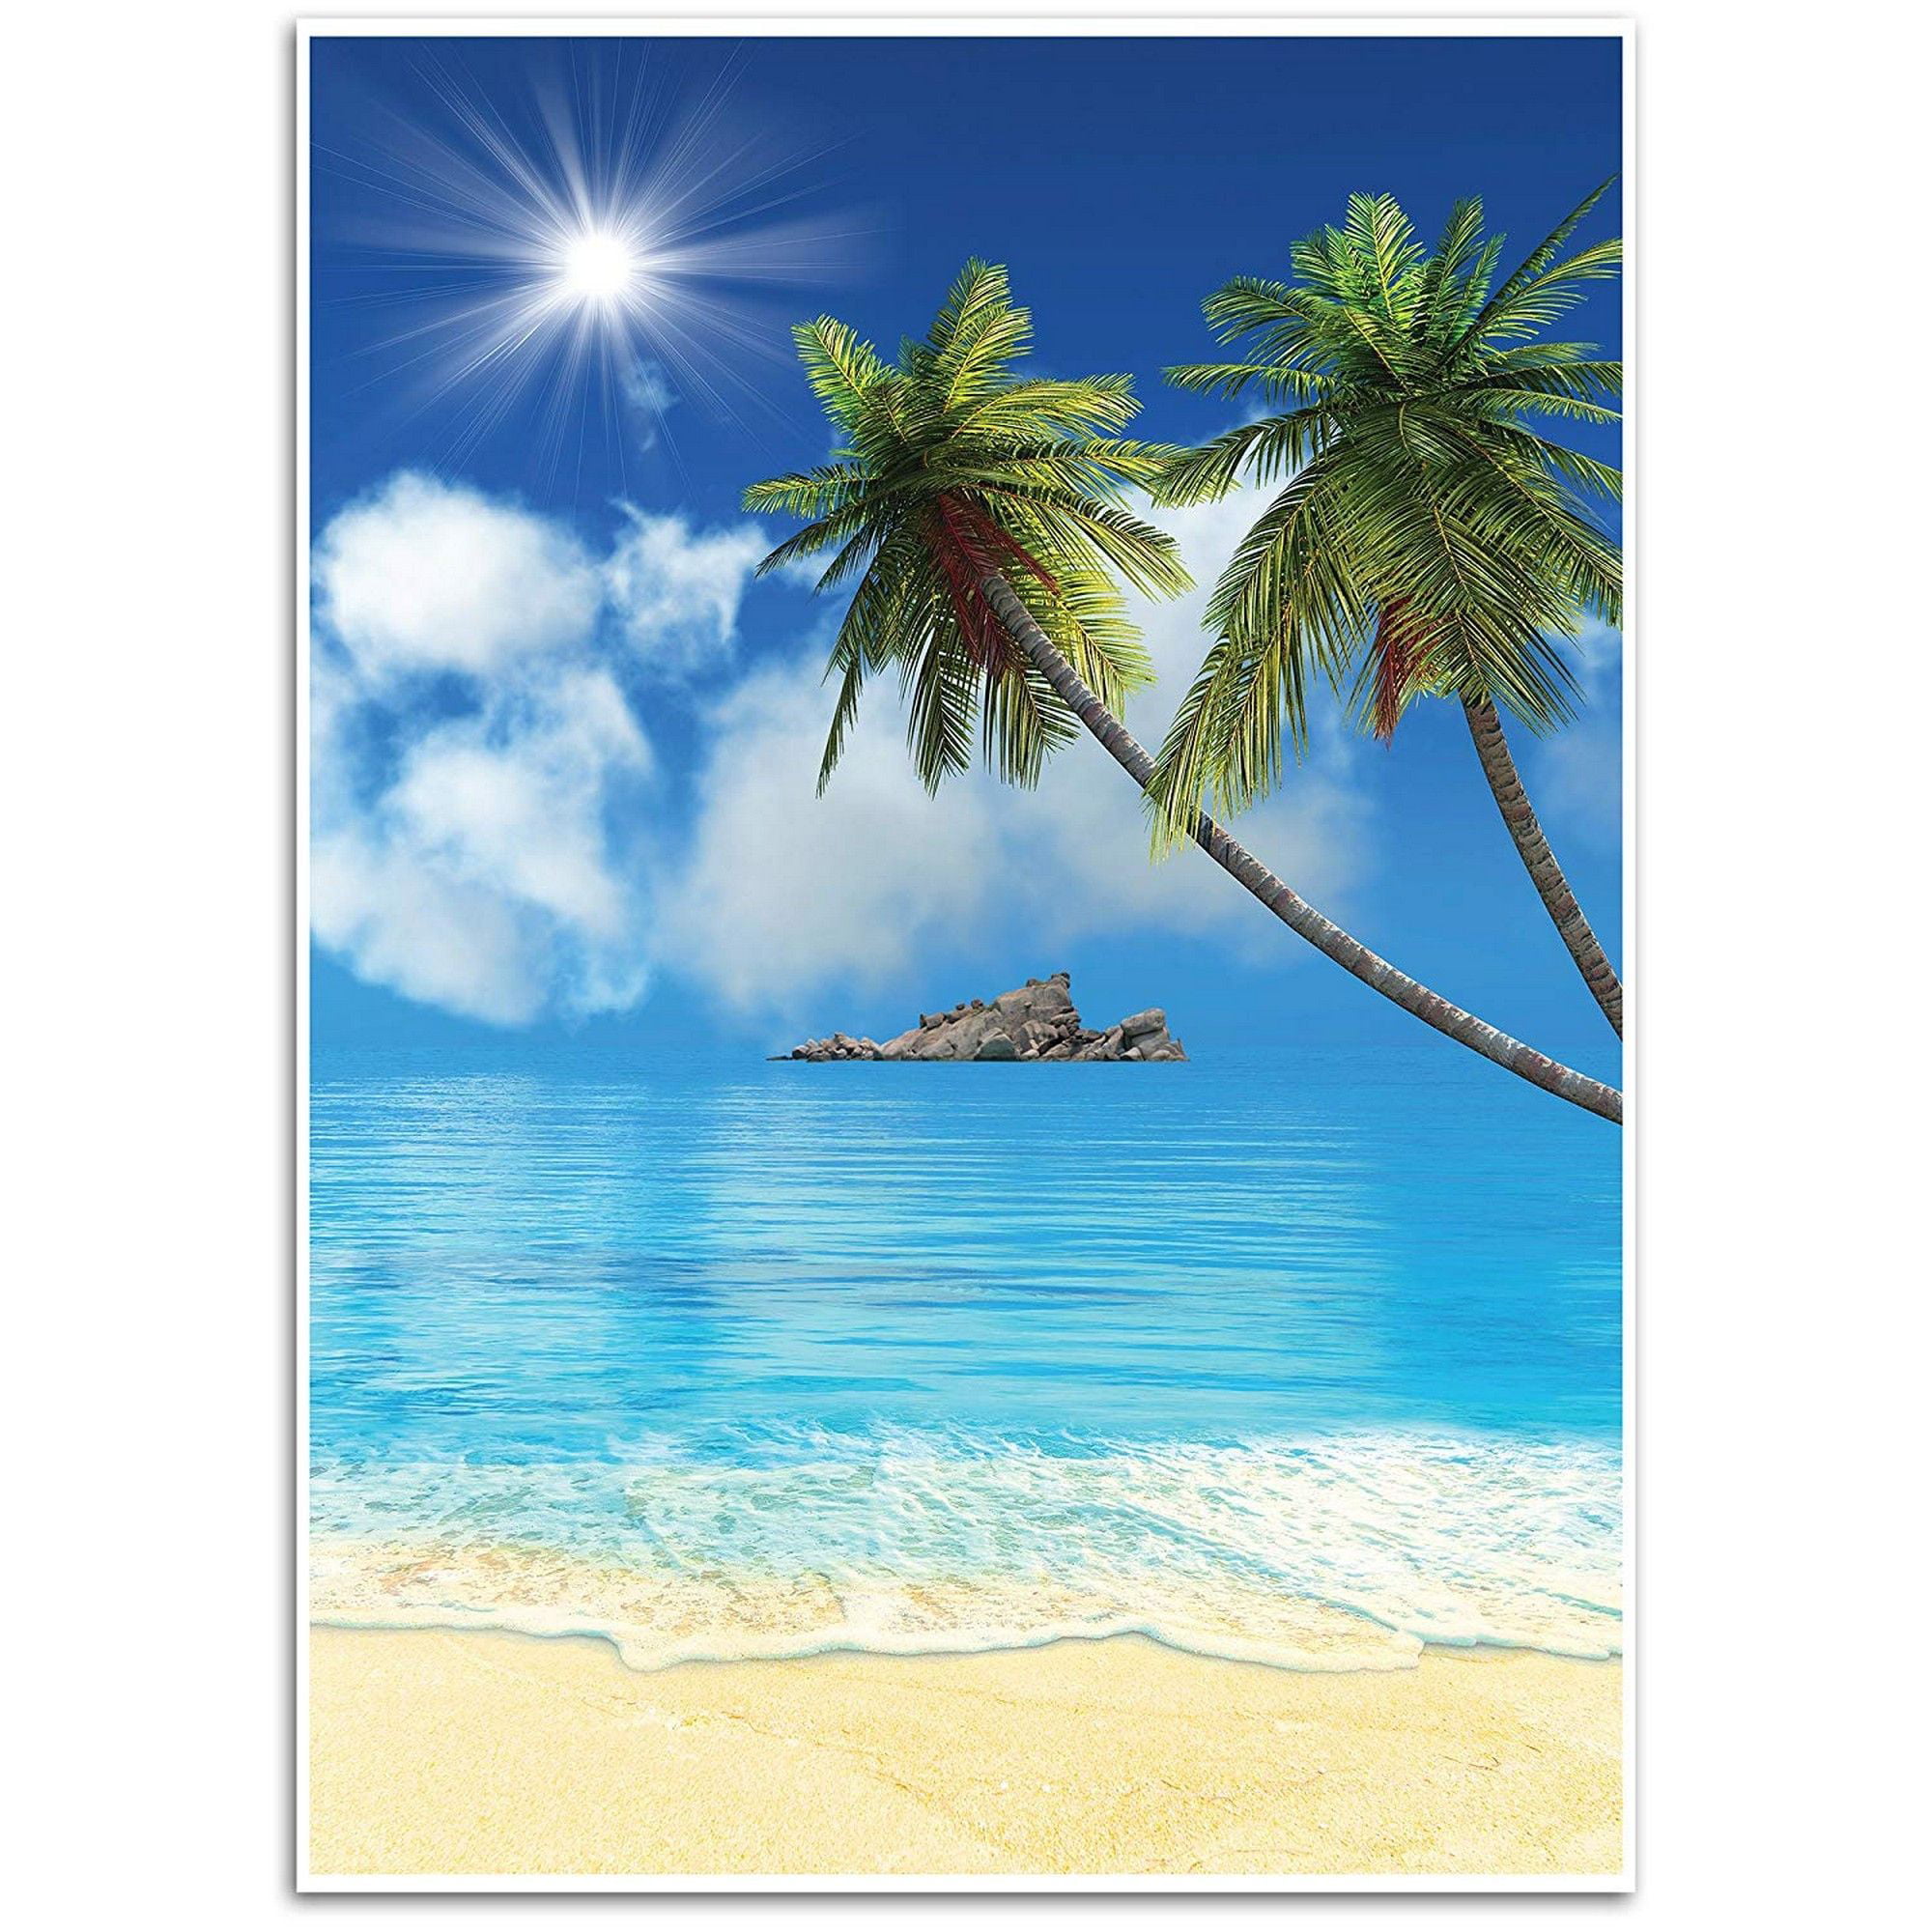 12x12ft Beautiful Sea View Beach Backdrop Seaside Tropical Forest Palm Tree Sand Island Mountains Seascape Photography Background for Wedding Party Events Buseinss Birthday Photo Studio Props